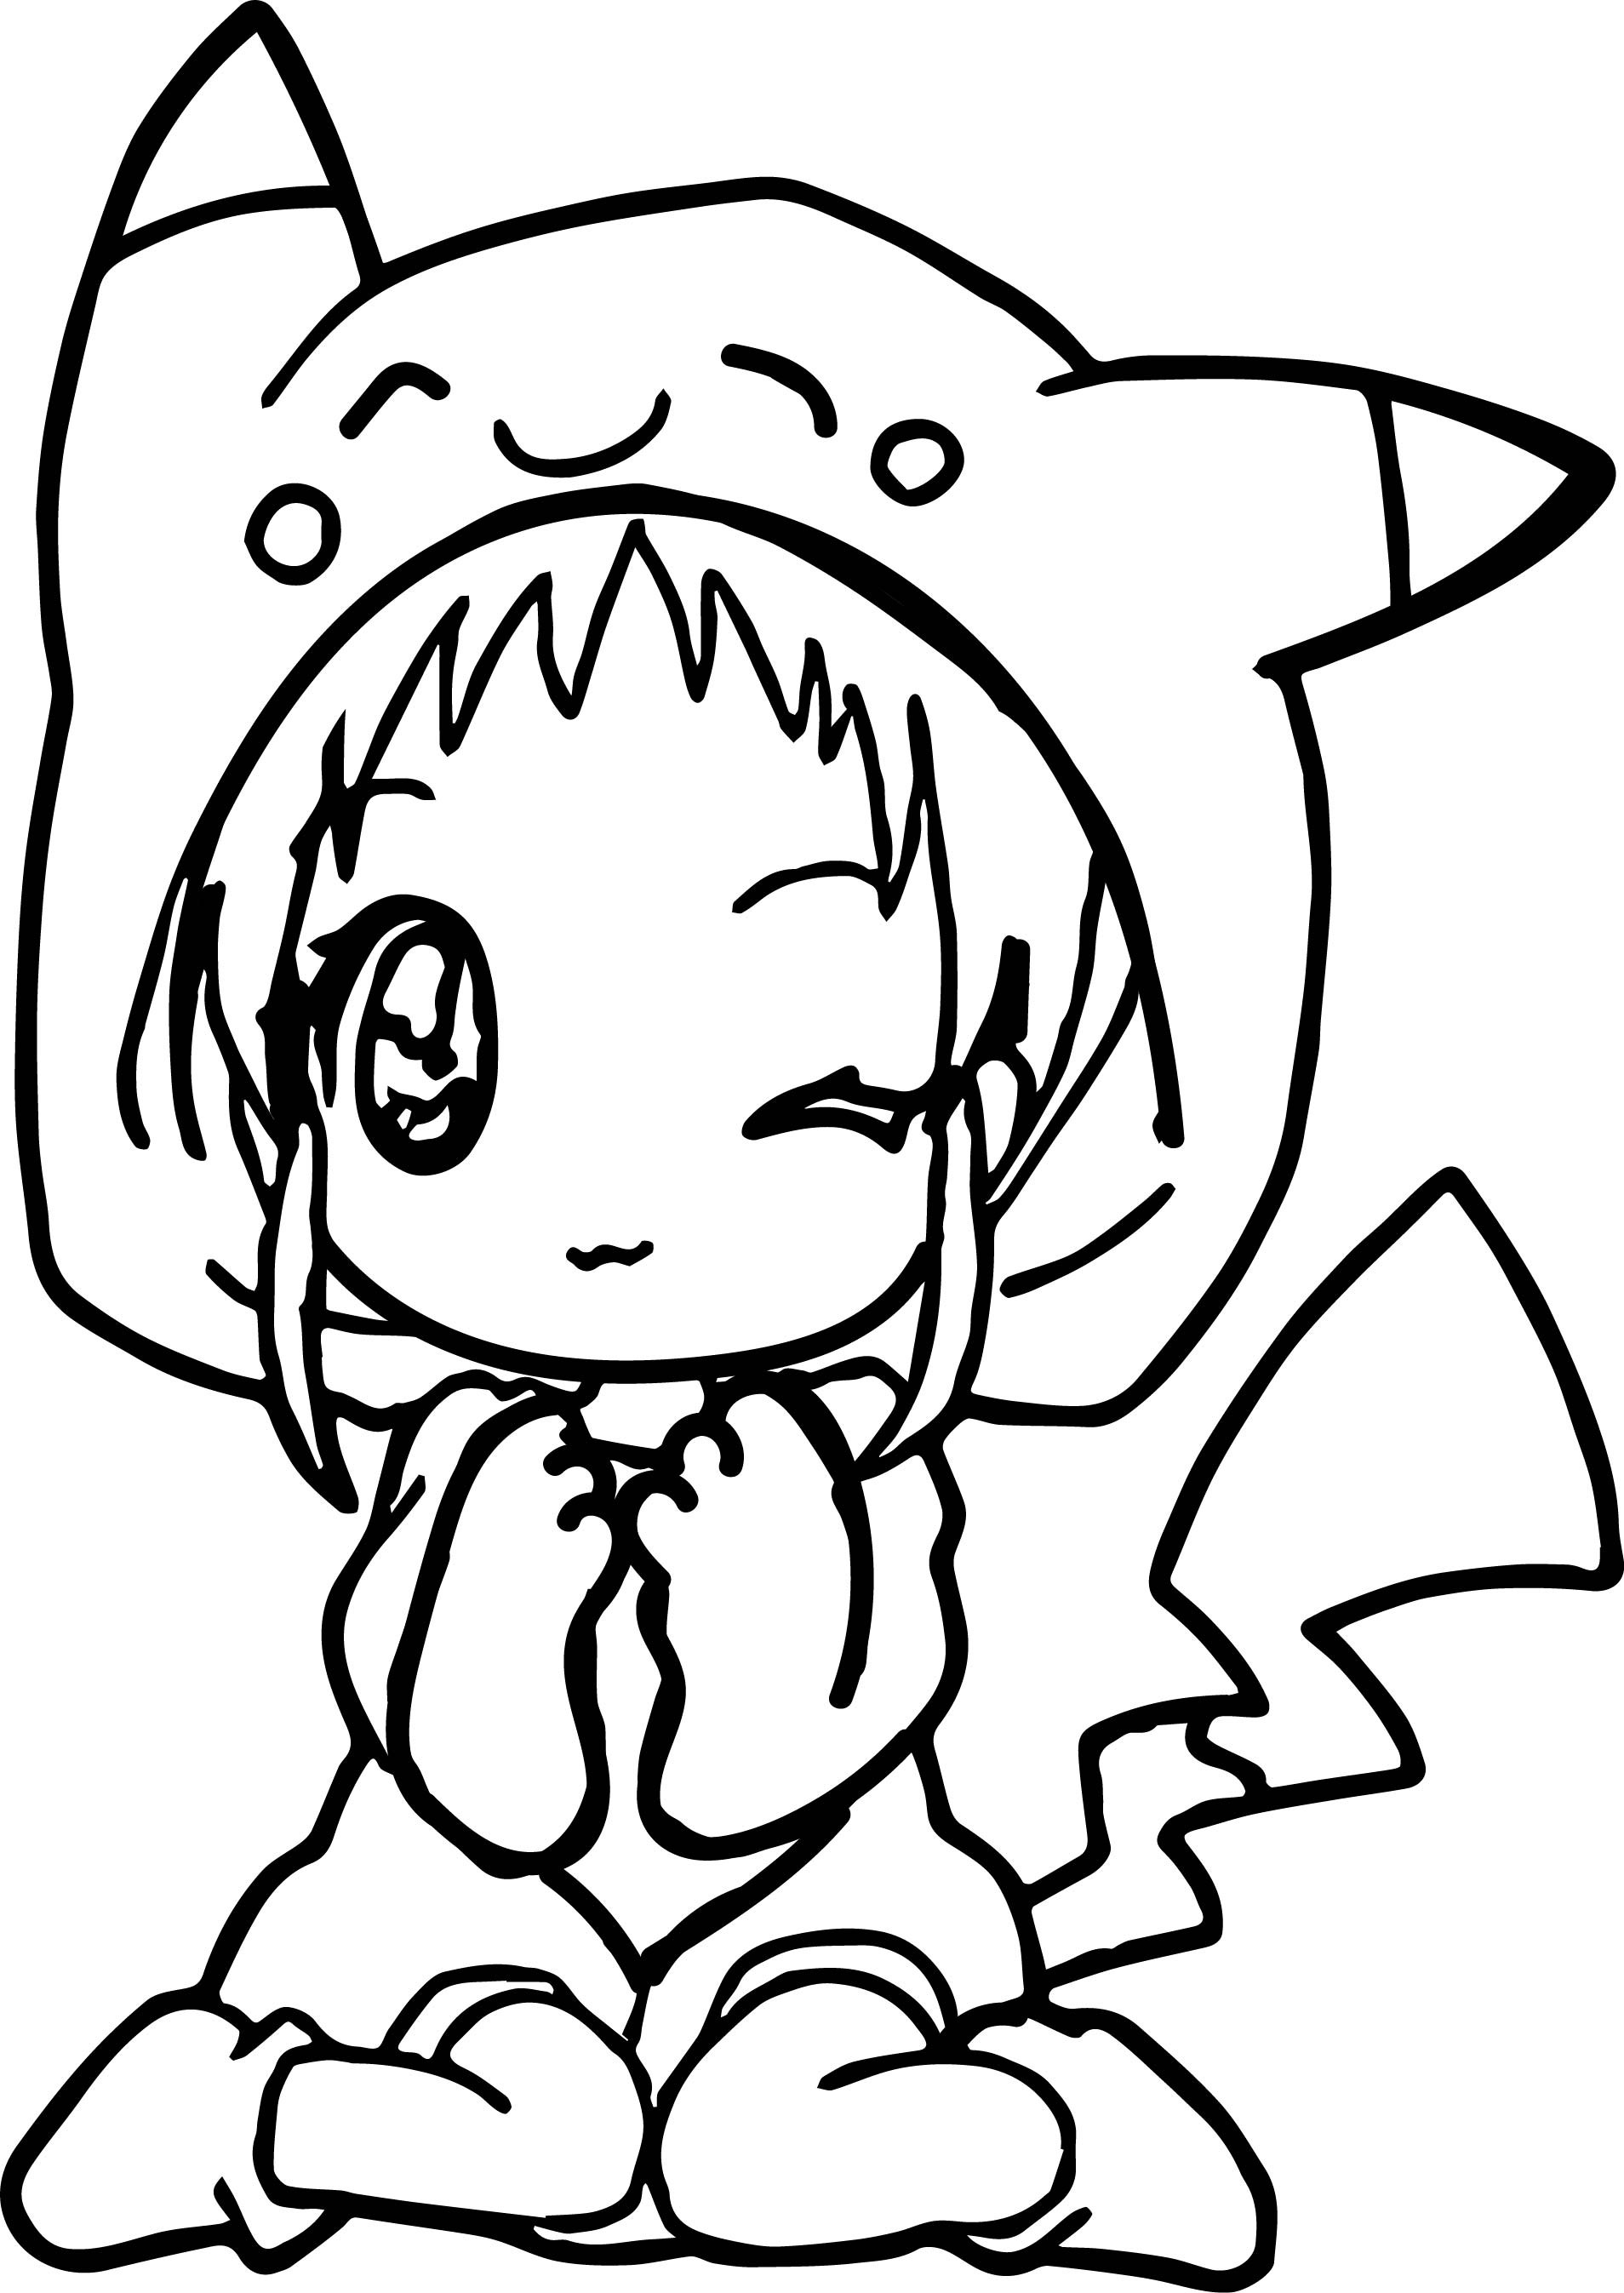 Girl Pikachu Coloring Pages
 Anime Girl Coloring Pages coloringsuite